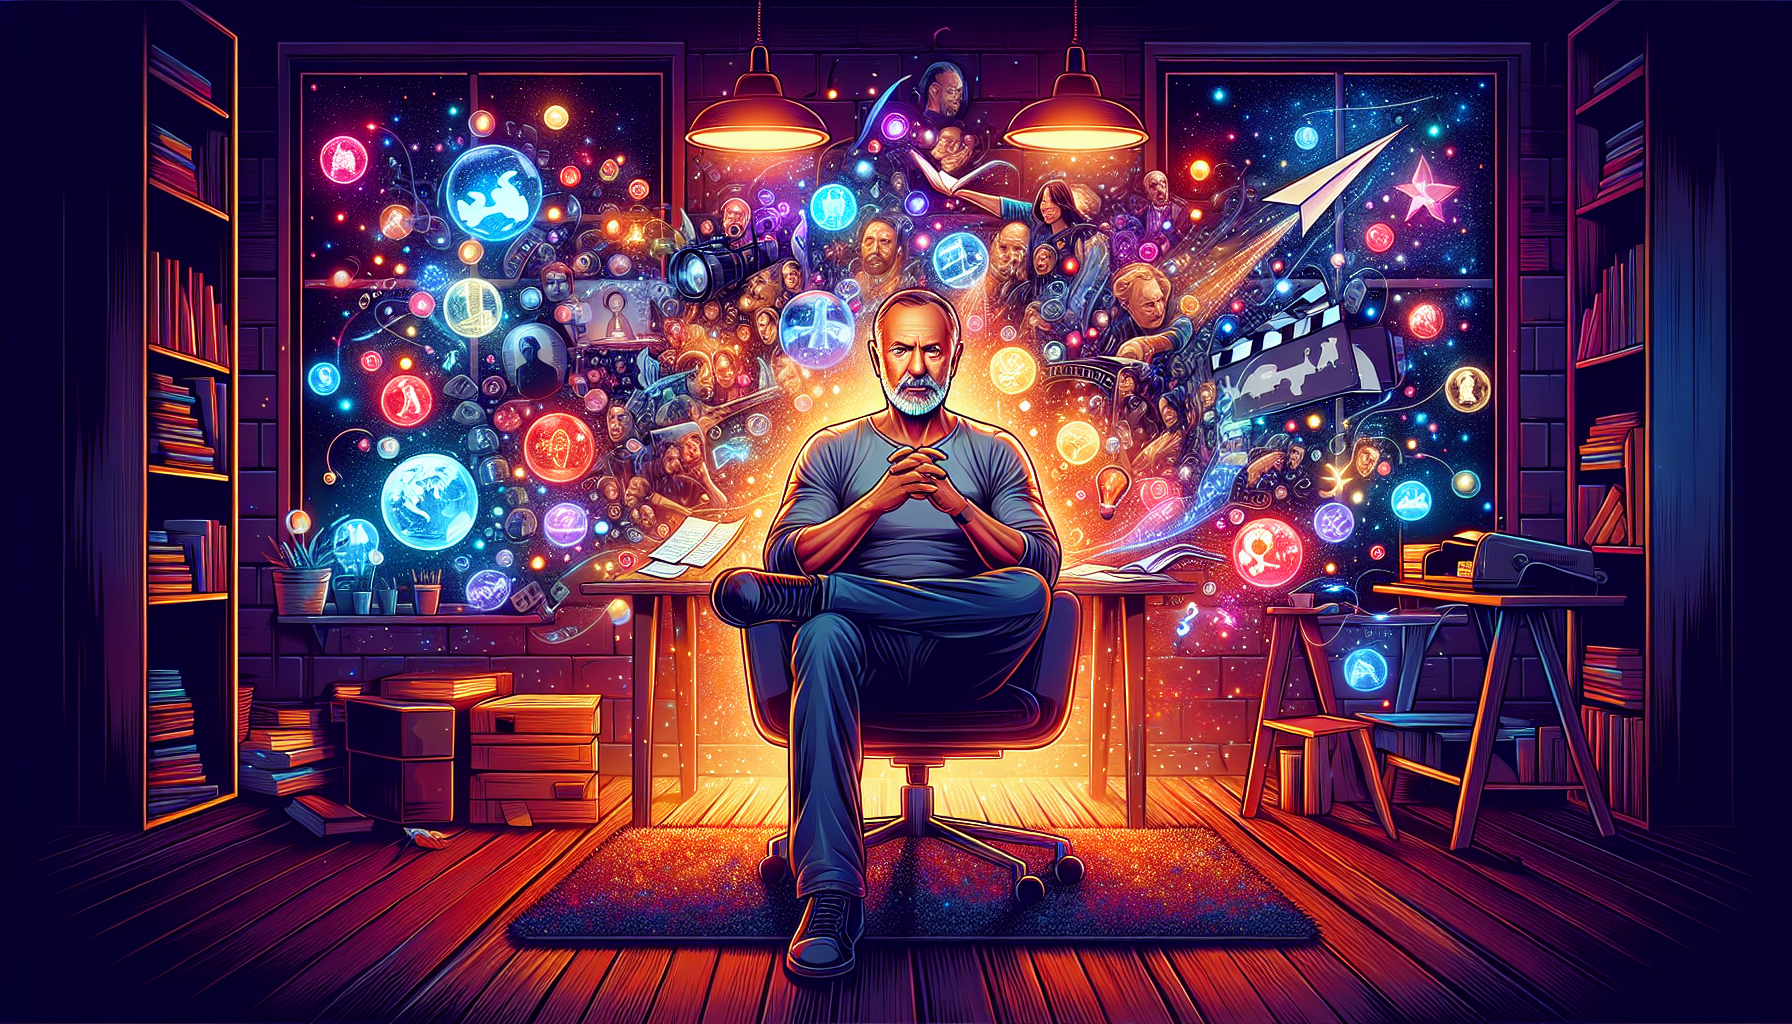 An imaginative and vibrant illustration of screenwriter John Ridley sitting in a cozy, dimly lit writer's room surrounded by floating, glowing words and images from his iconic films and television sho